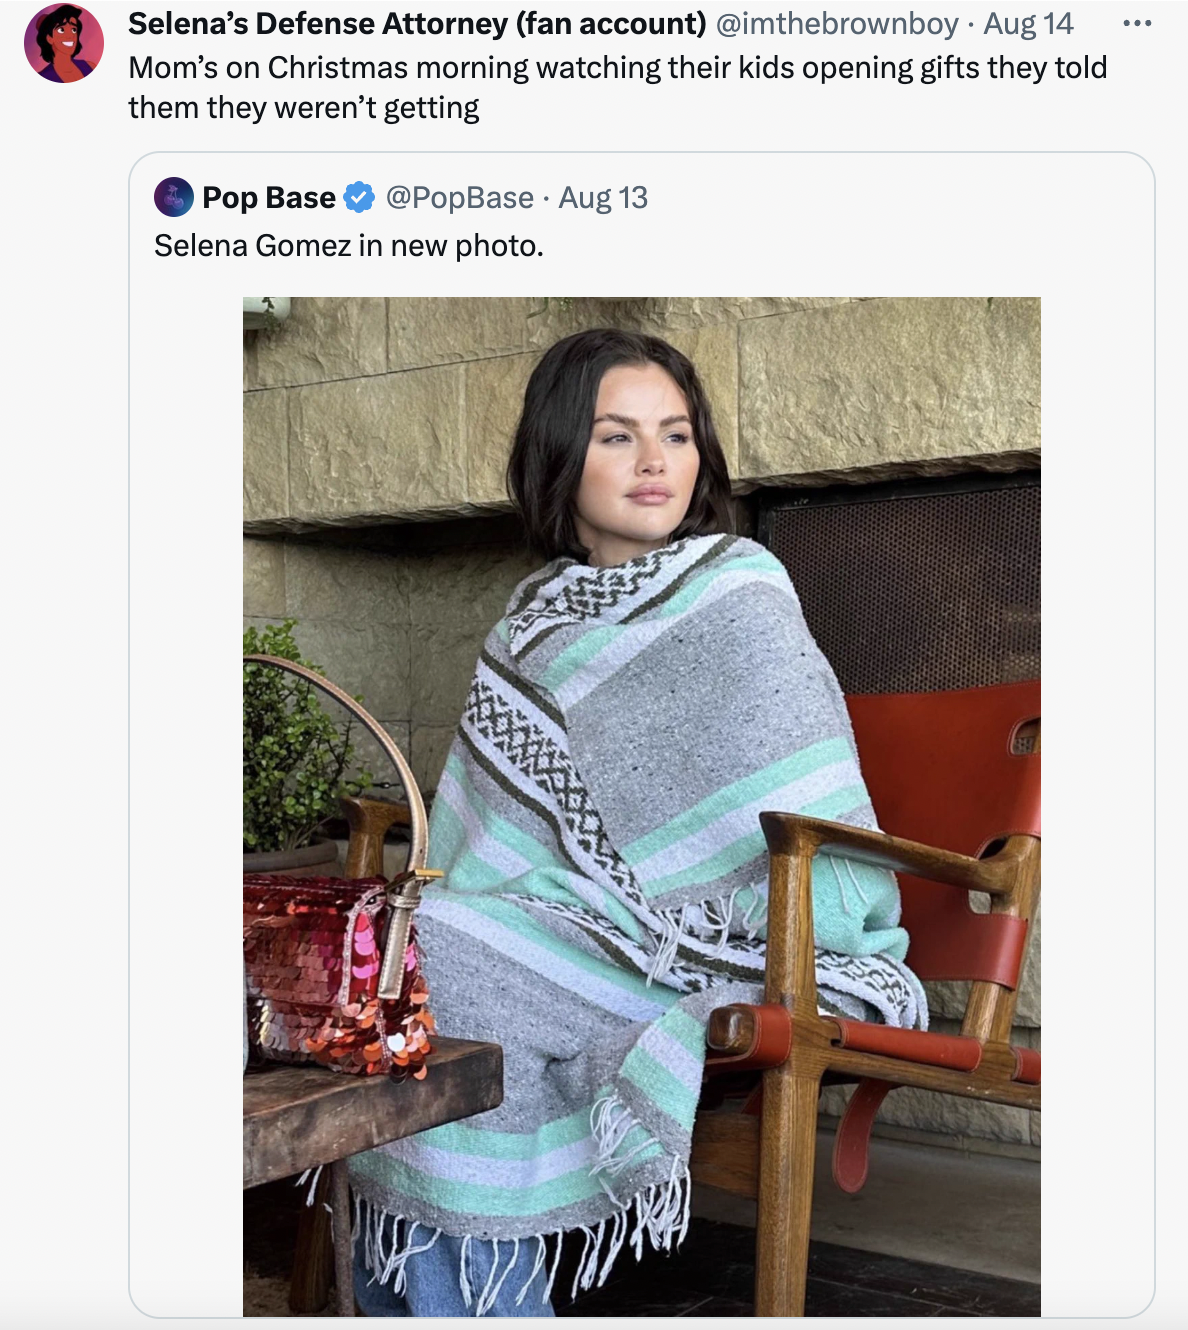 selena gomez in a blanket - stole - Selena's Defense Attorney fan account Aug 14 Mom's on Christmas morning watching their kids opening gifts they told them they weren't getting Pop Base Aug 13 Selena Gomez in new photo. 2714